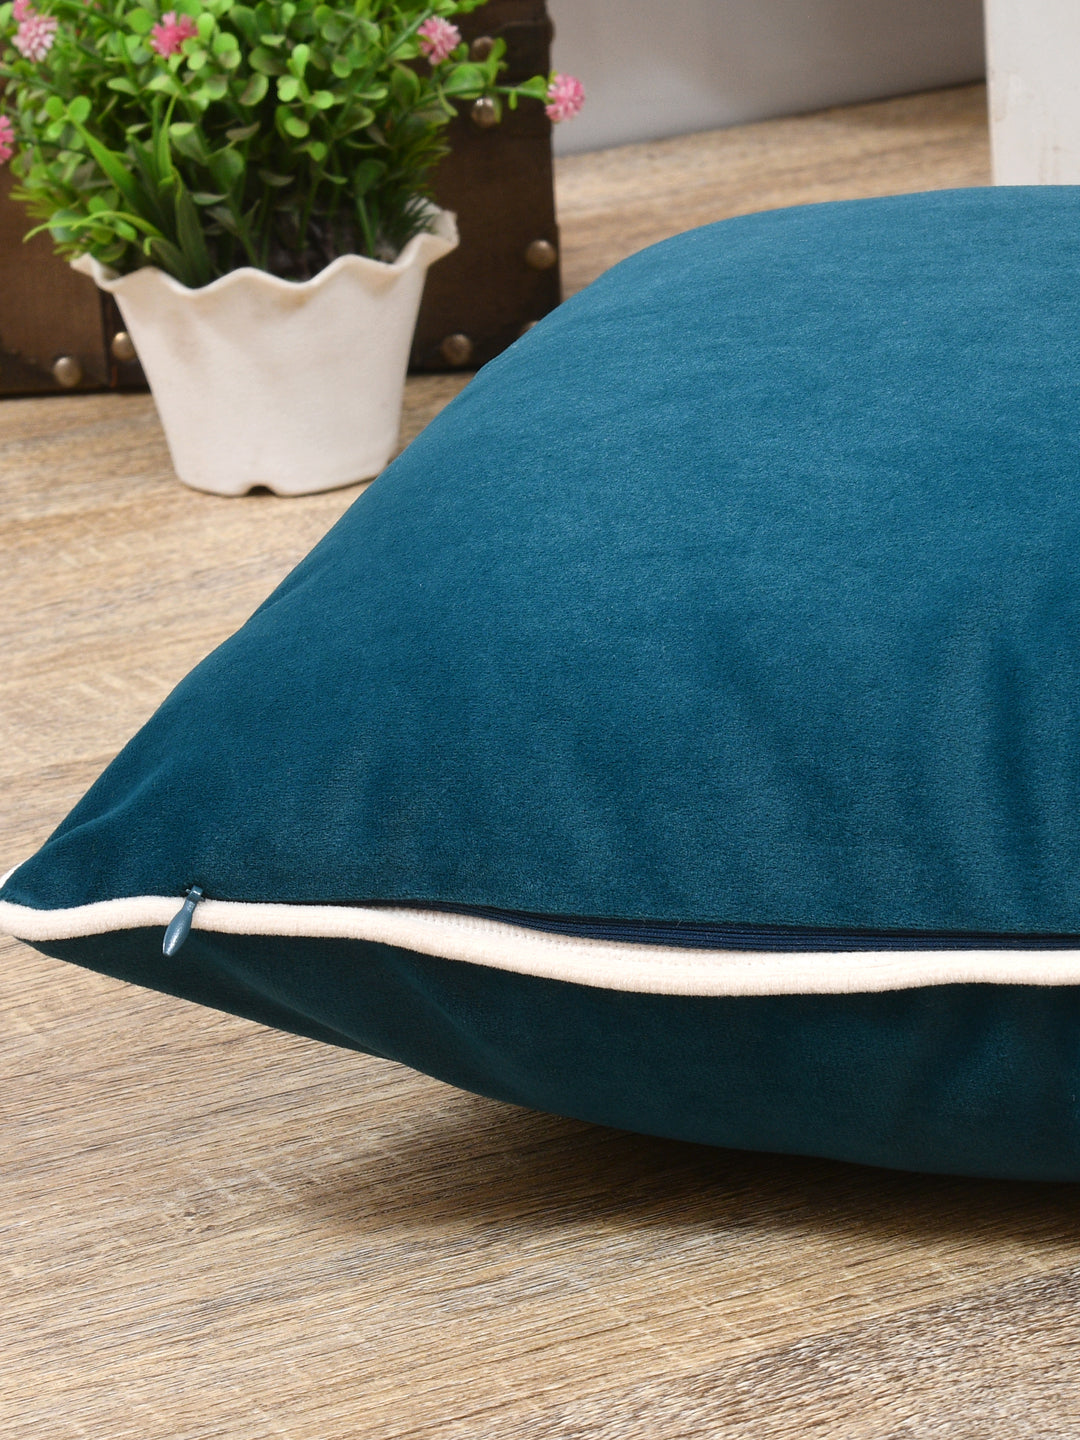 Velvet Cushion Covers; Set of 4; Teal With White Piping